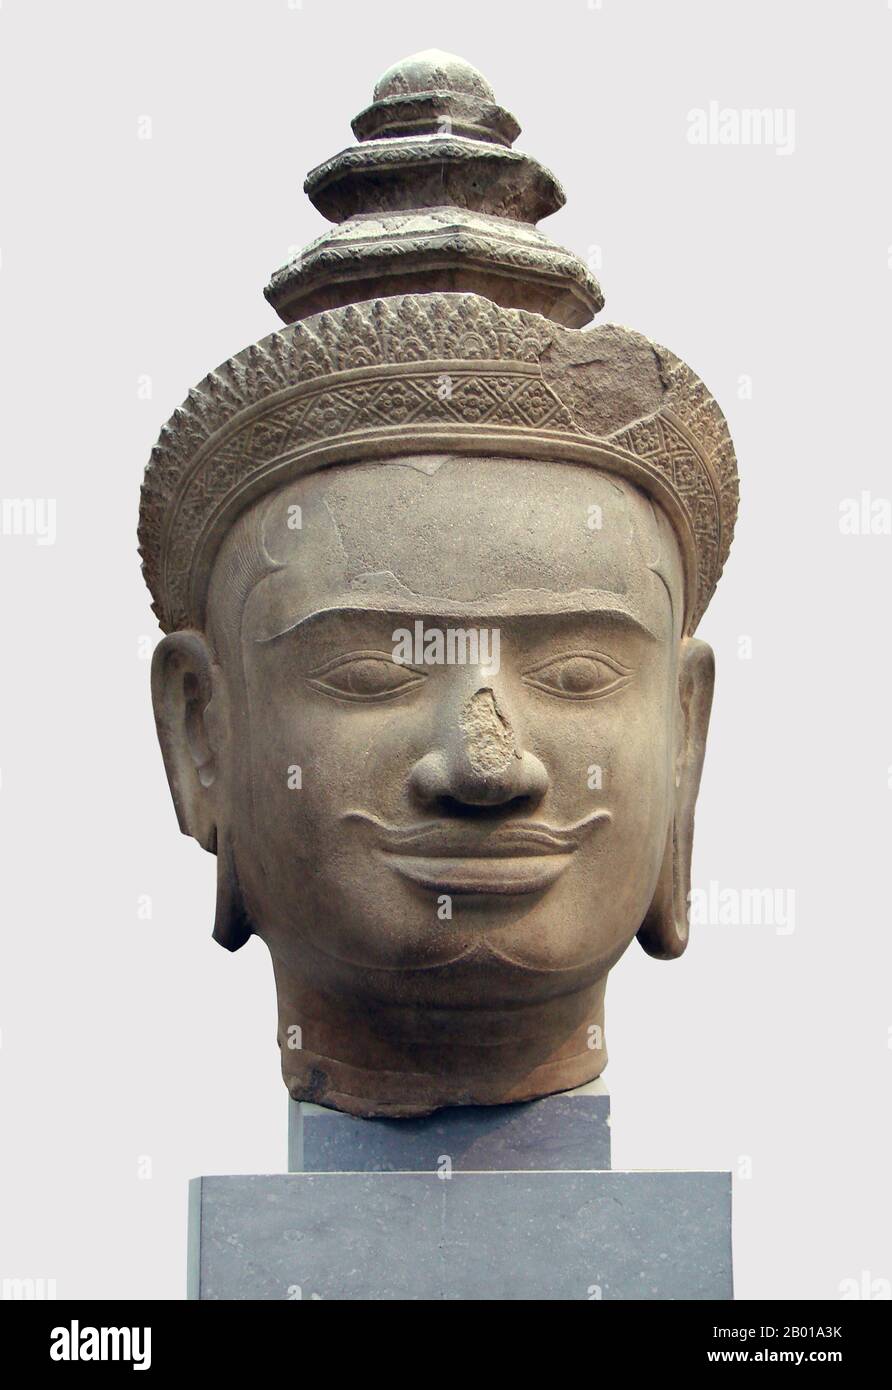 Cambodia: Head of Vishnu from Phnom Bok, Siem Reap, now in the Musée Guimet, Paris, 9th-10th century.  Phnom Bok is a hill in the northeast of the East Baray in Cambodia, with a prasat (temple) of the same name built on it. It is one of a 'trilogy of mountains', each of which has a temple with similar layout. The creation of the temple is credited to the reign of Yasovarman I (889–910) between the 9th and 10th centuries and was established after he moved his capital to Angkor and named it Yasodharapura. The two other sister temples are Phnom Bakheng and Phnom Krom. Stock Photo